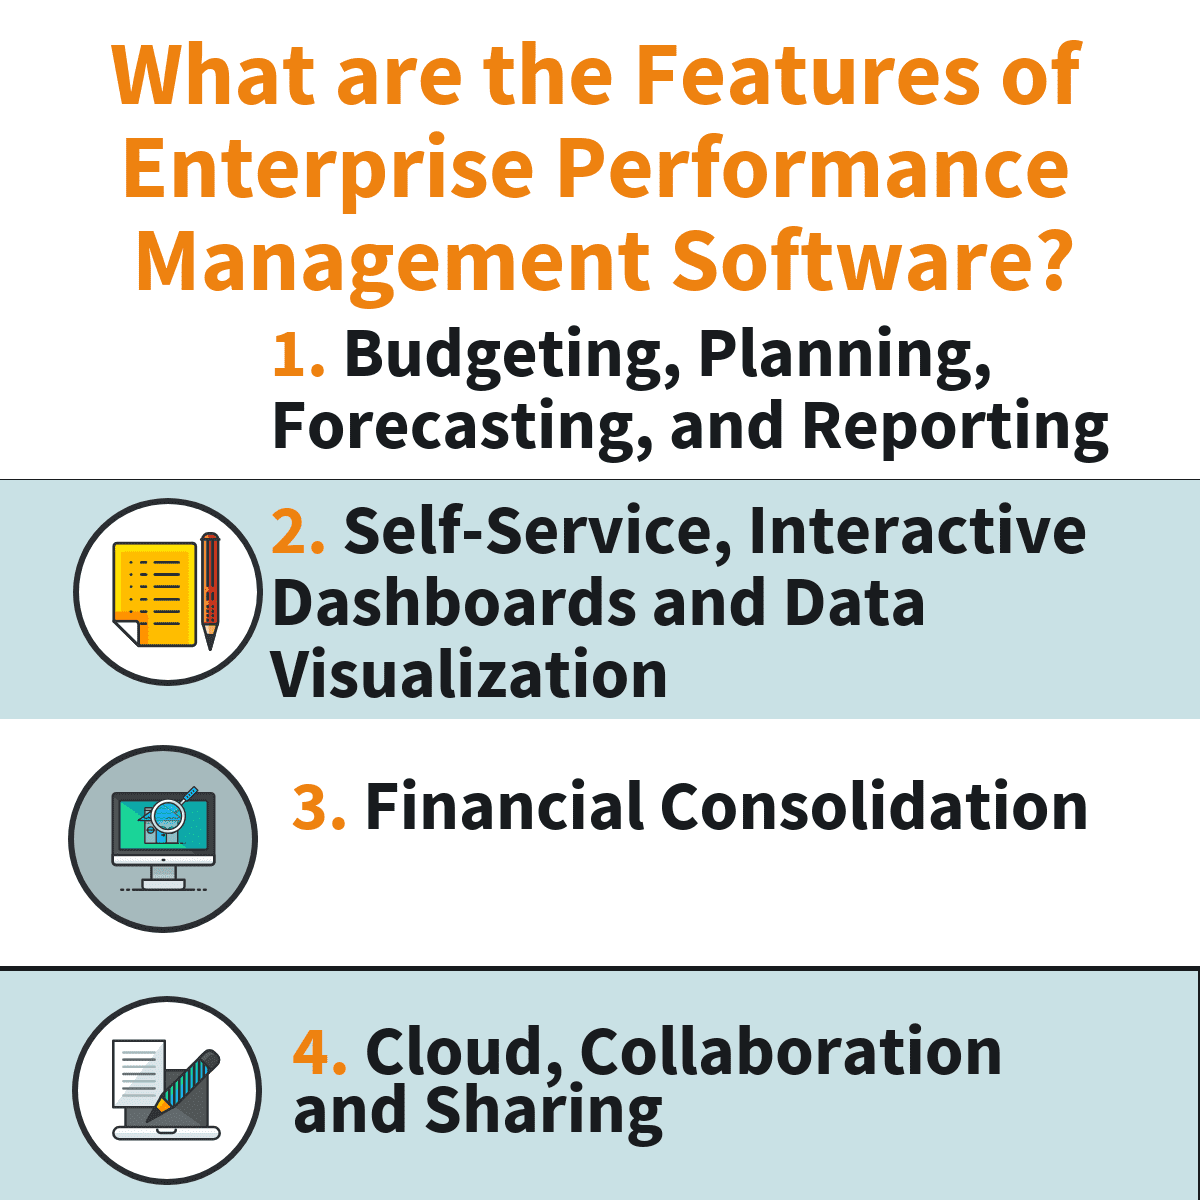 What are the features of Enterprise Performance Management Software?